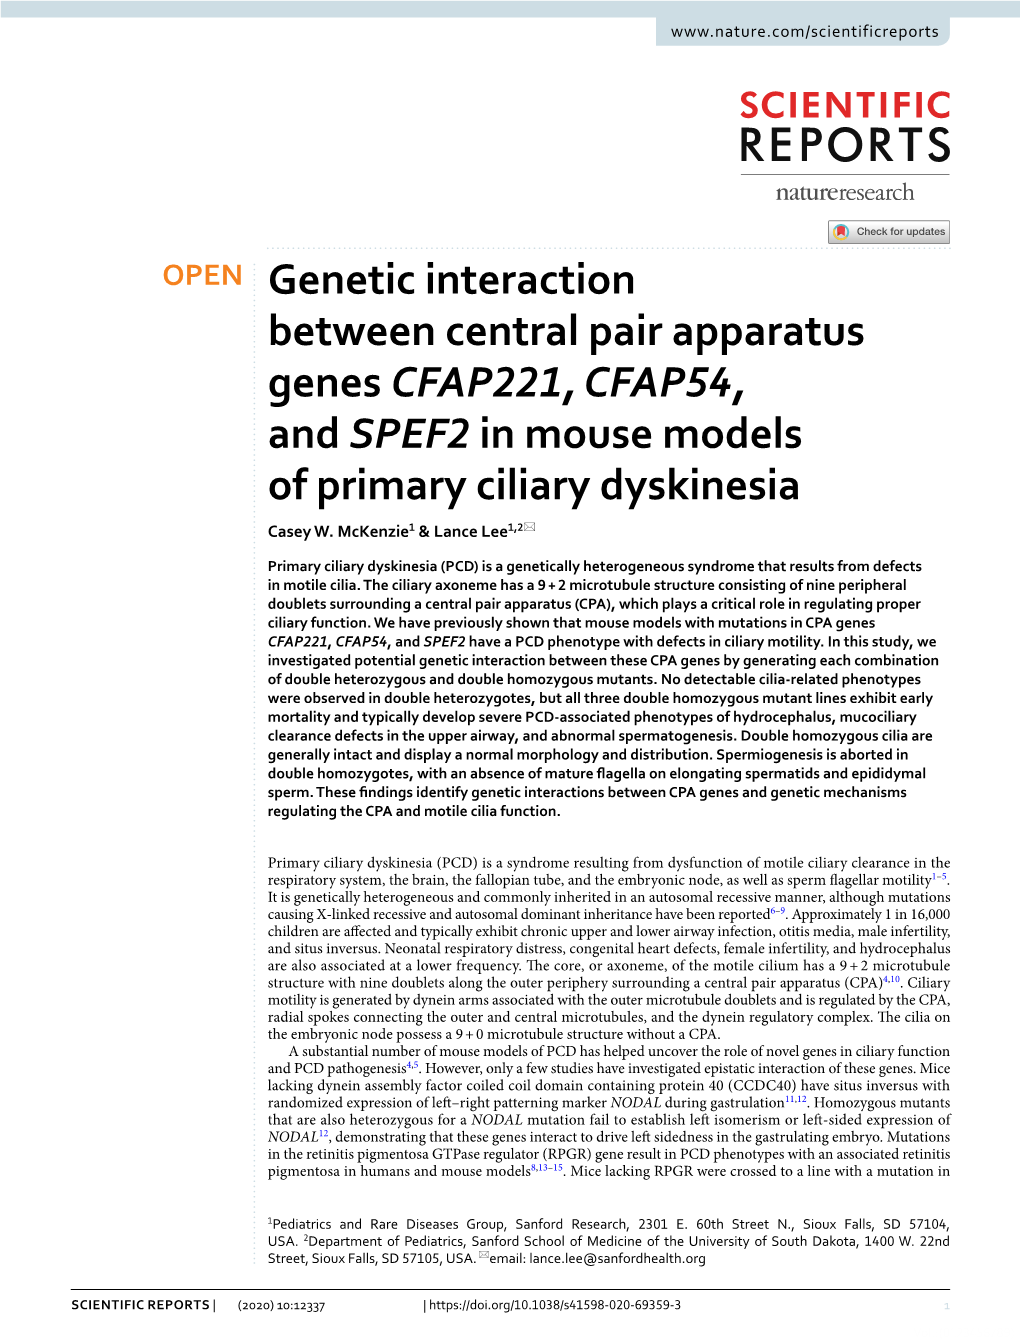 Genetic Interaction Between Central Pair Apparatus Genes CFAP221, CFAP54, and SPEF2 in Mouse Models of Primary Ciliary Dyskinesia Casey W